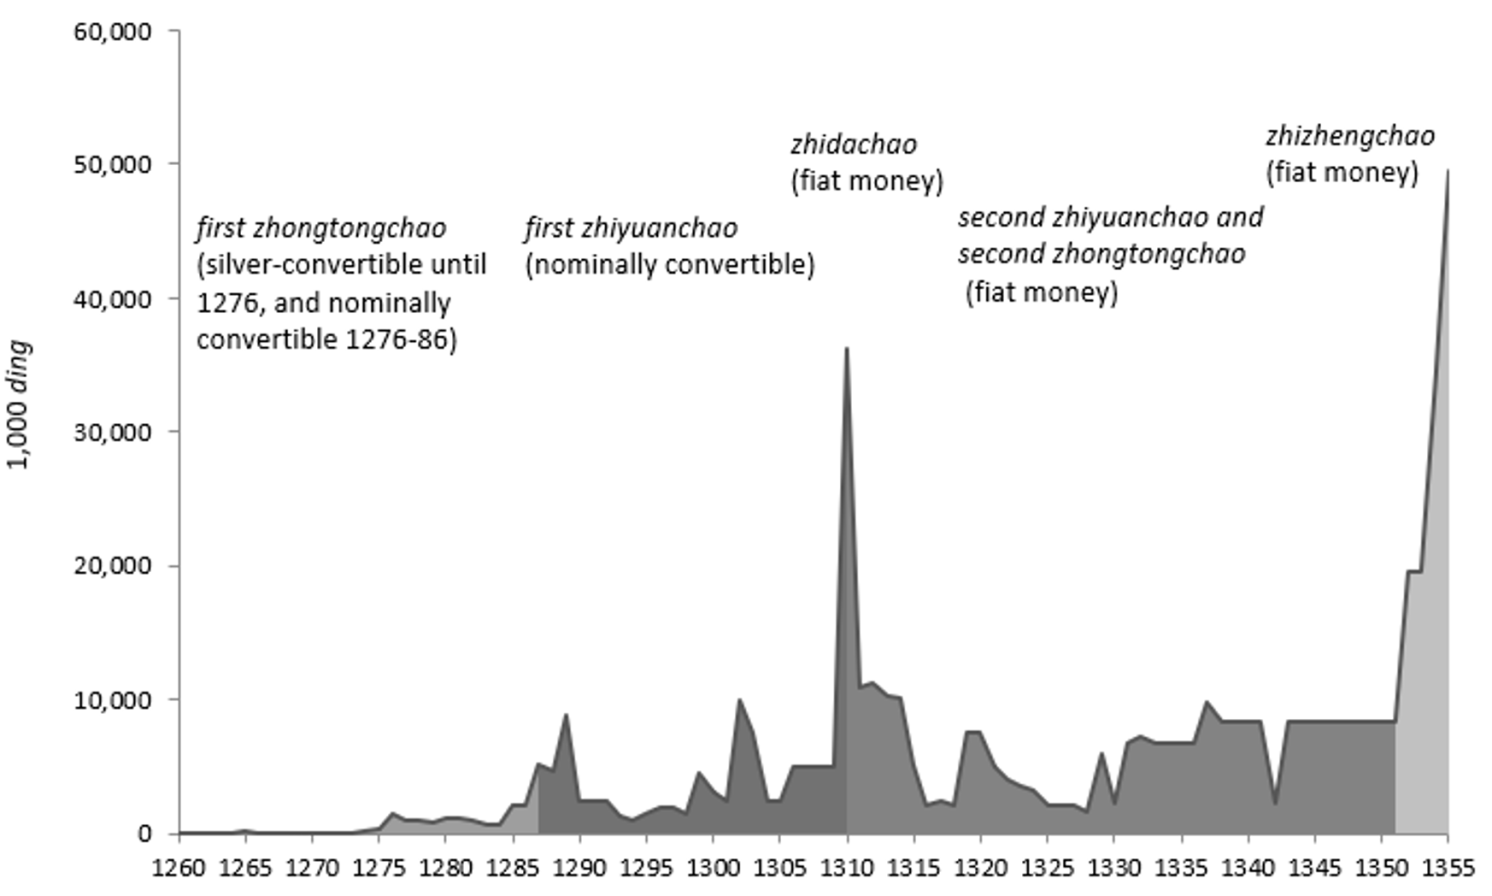 Figure 3 Annual nominal money issues, 1260–1355